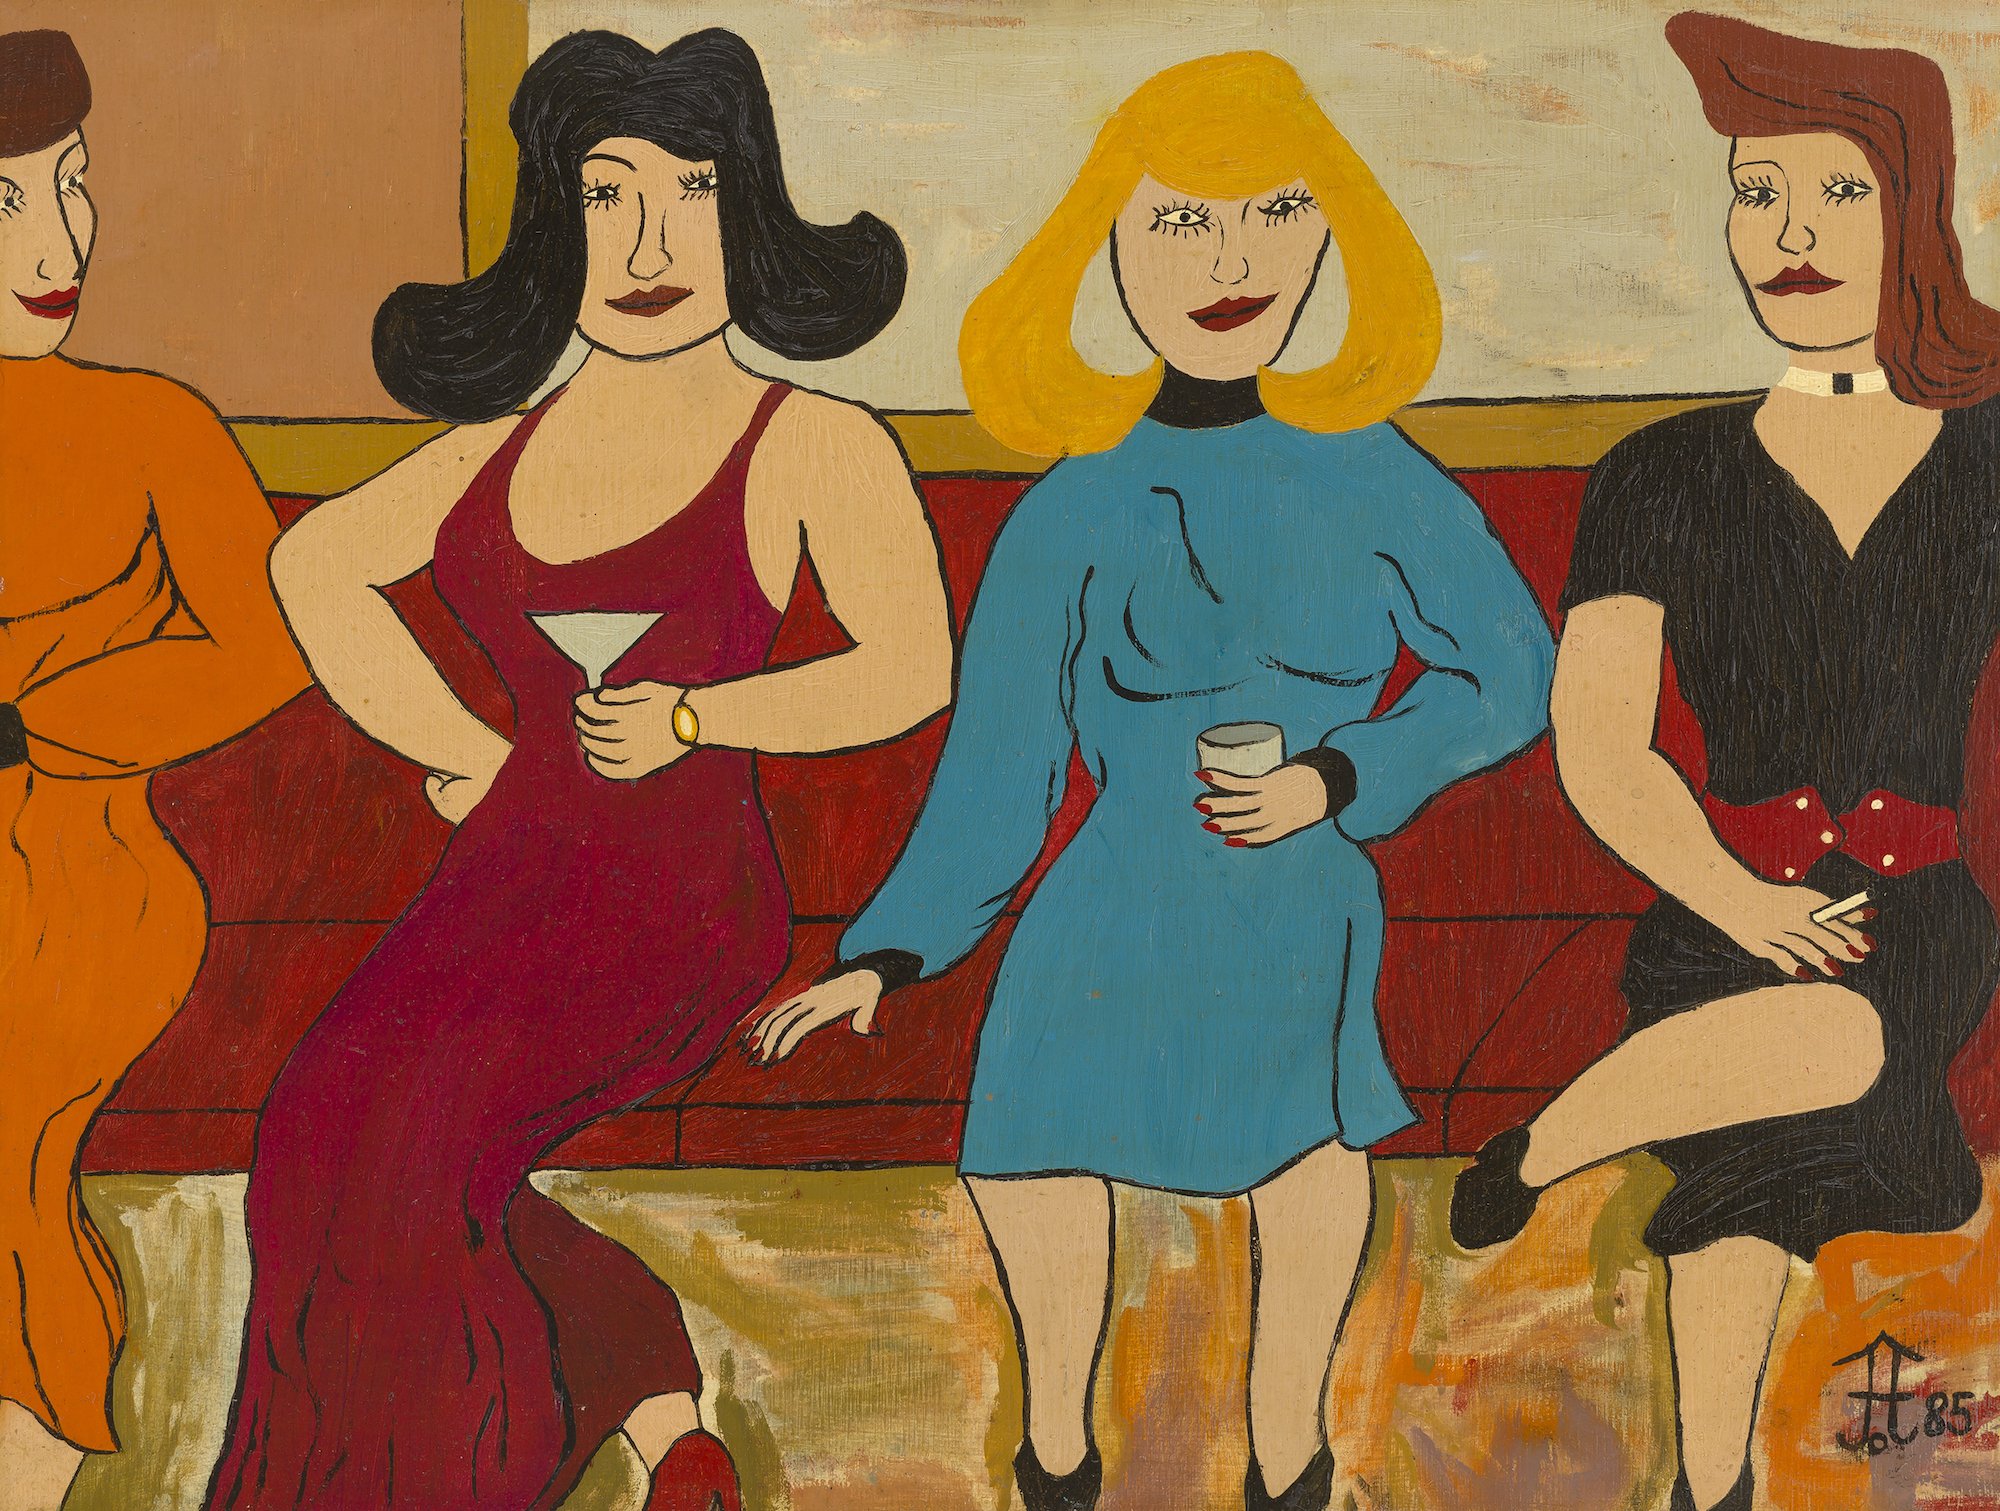 Four women sitting on a red bench in orange, red, blue, and black dresses